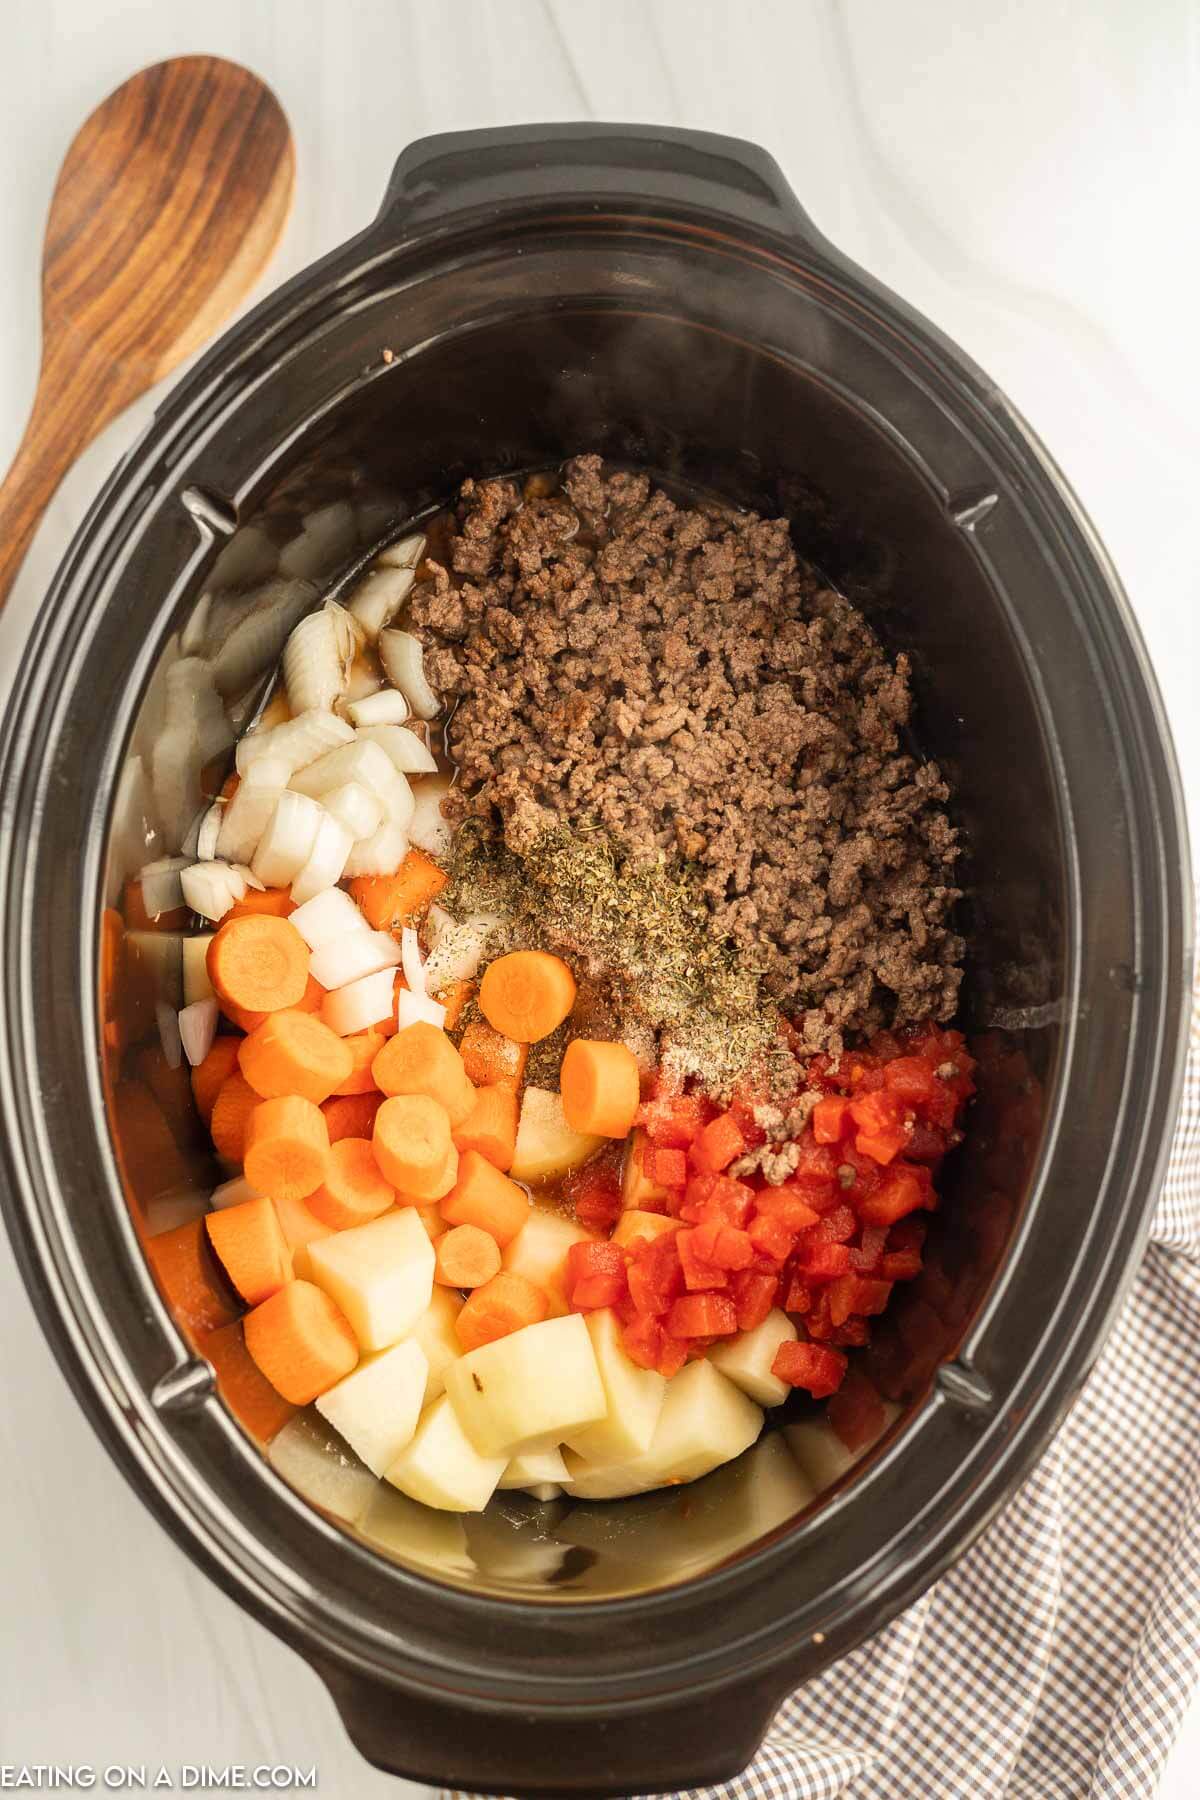 Adding the ingredients to the slow cooker